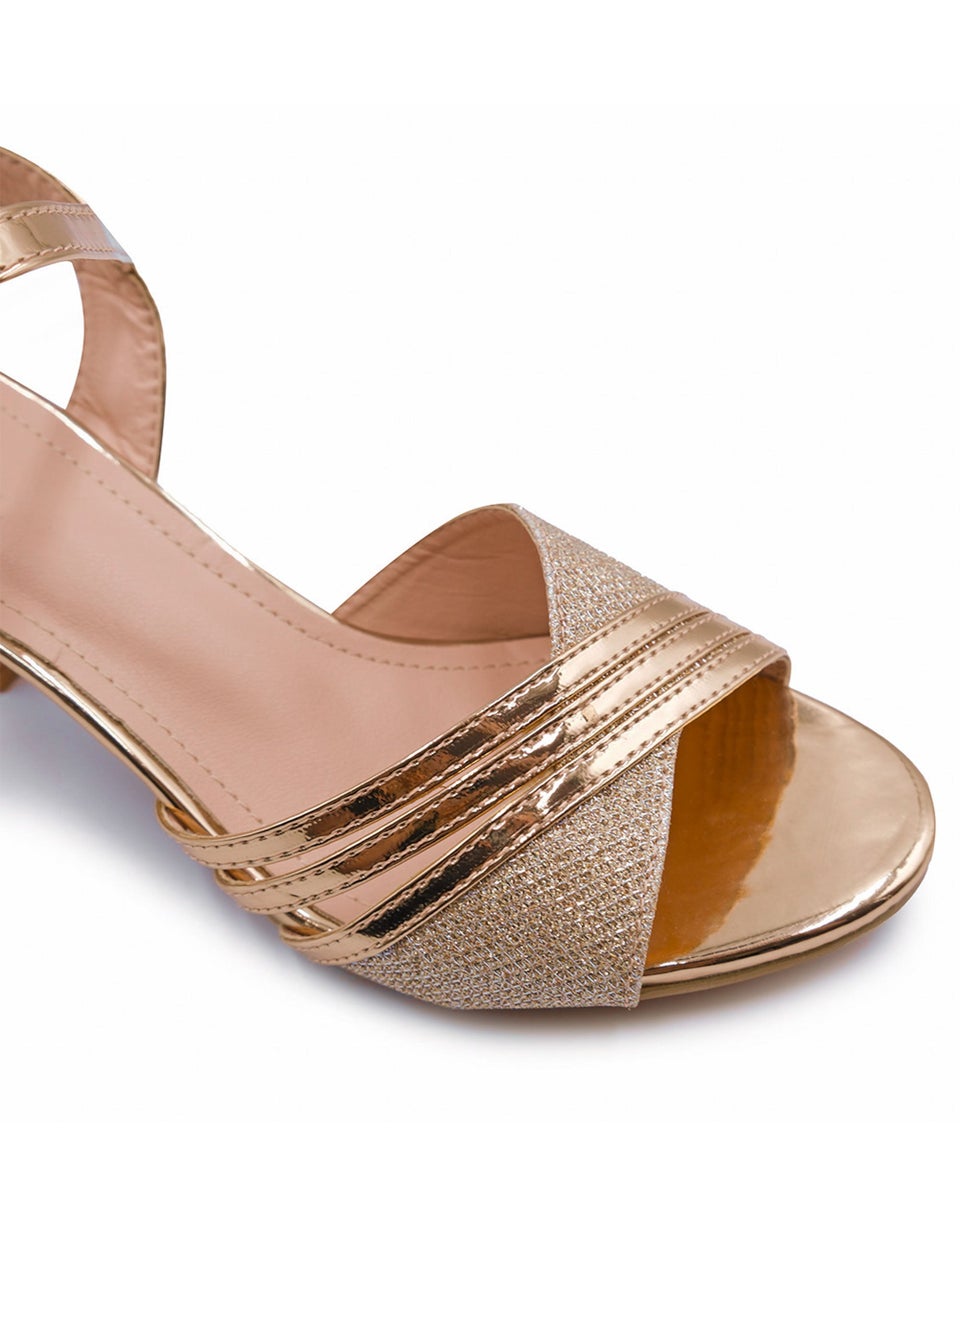 Where's That From Stormi Low Heel Sandals In RoseGold Glitter